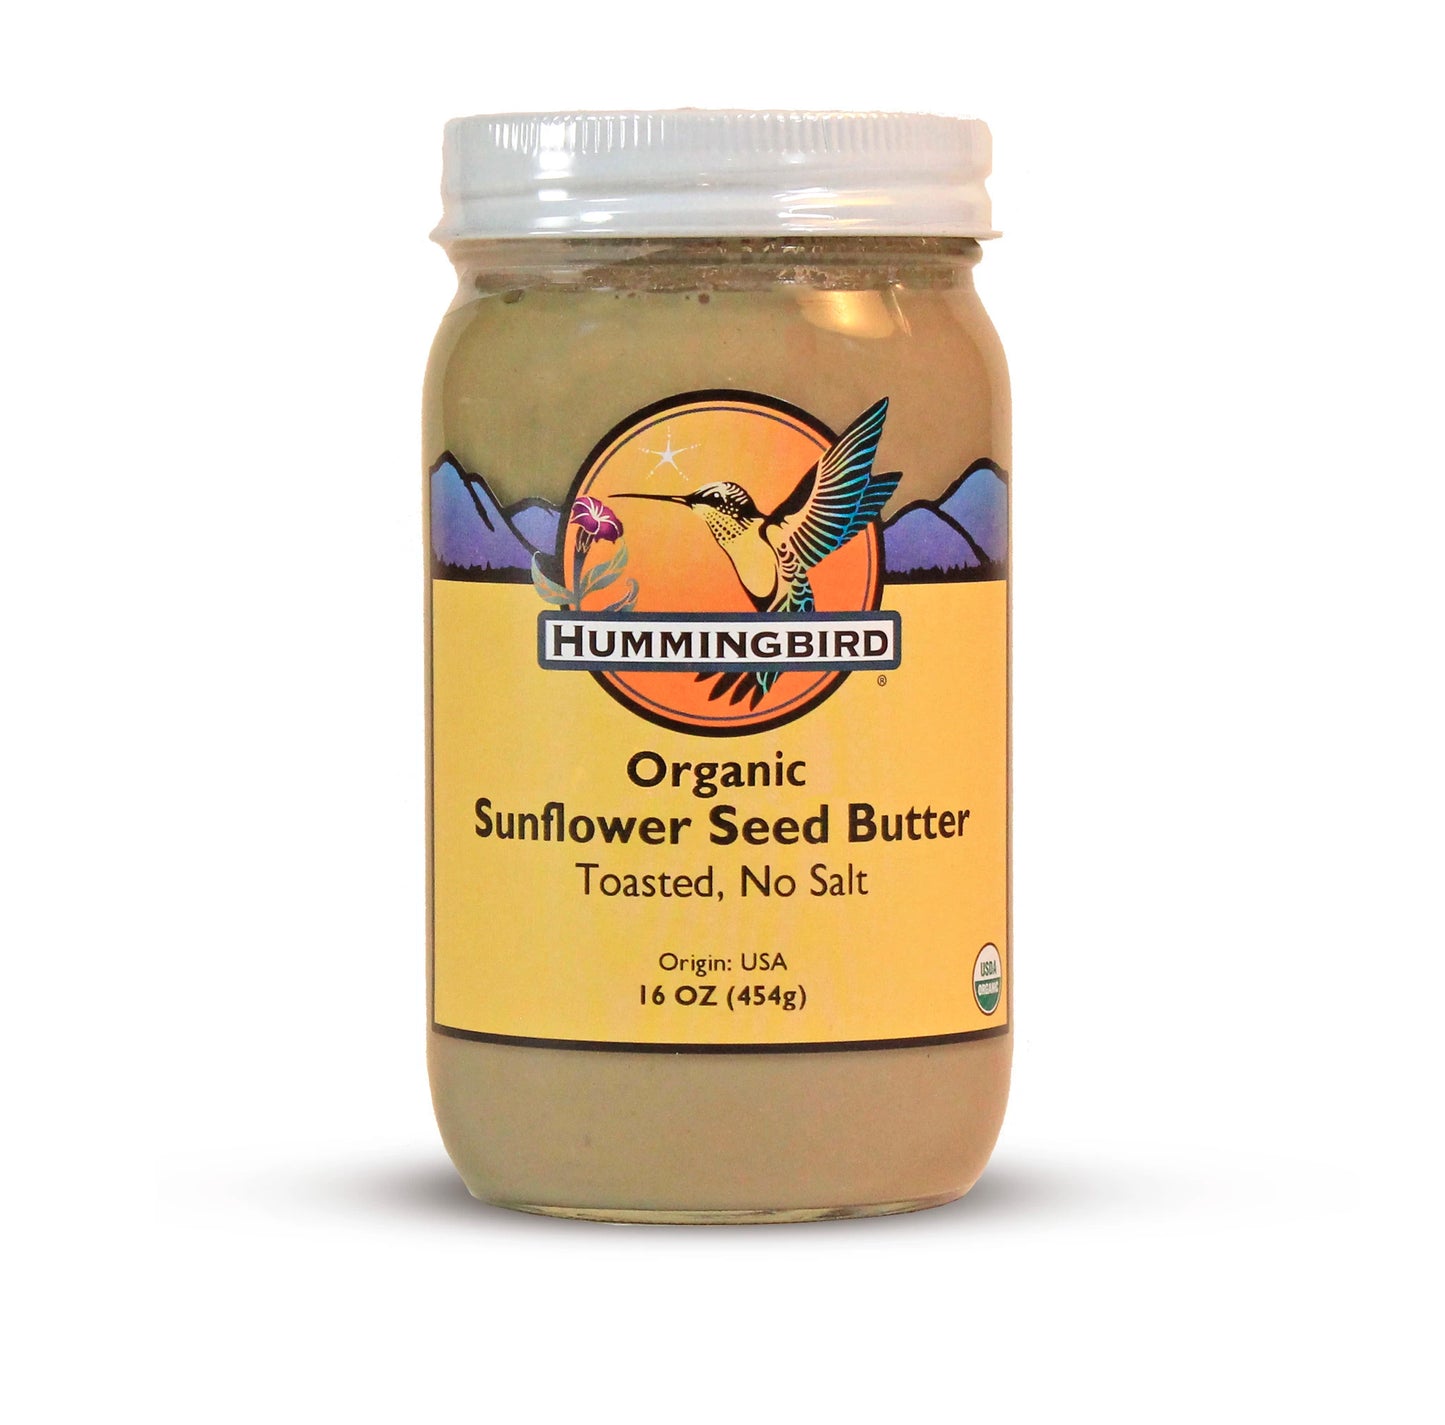 Sunflower Seed Butter, Toasted